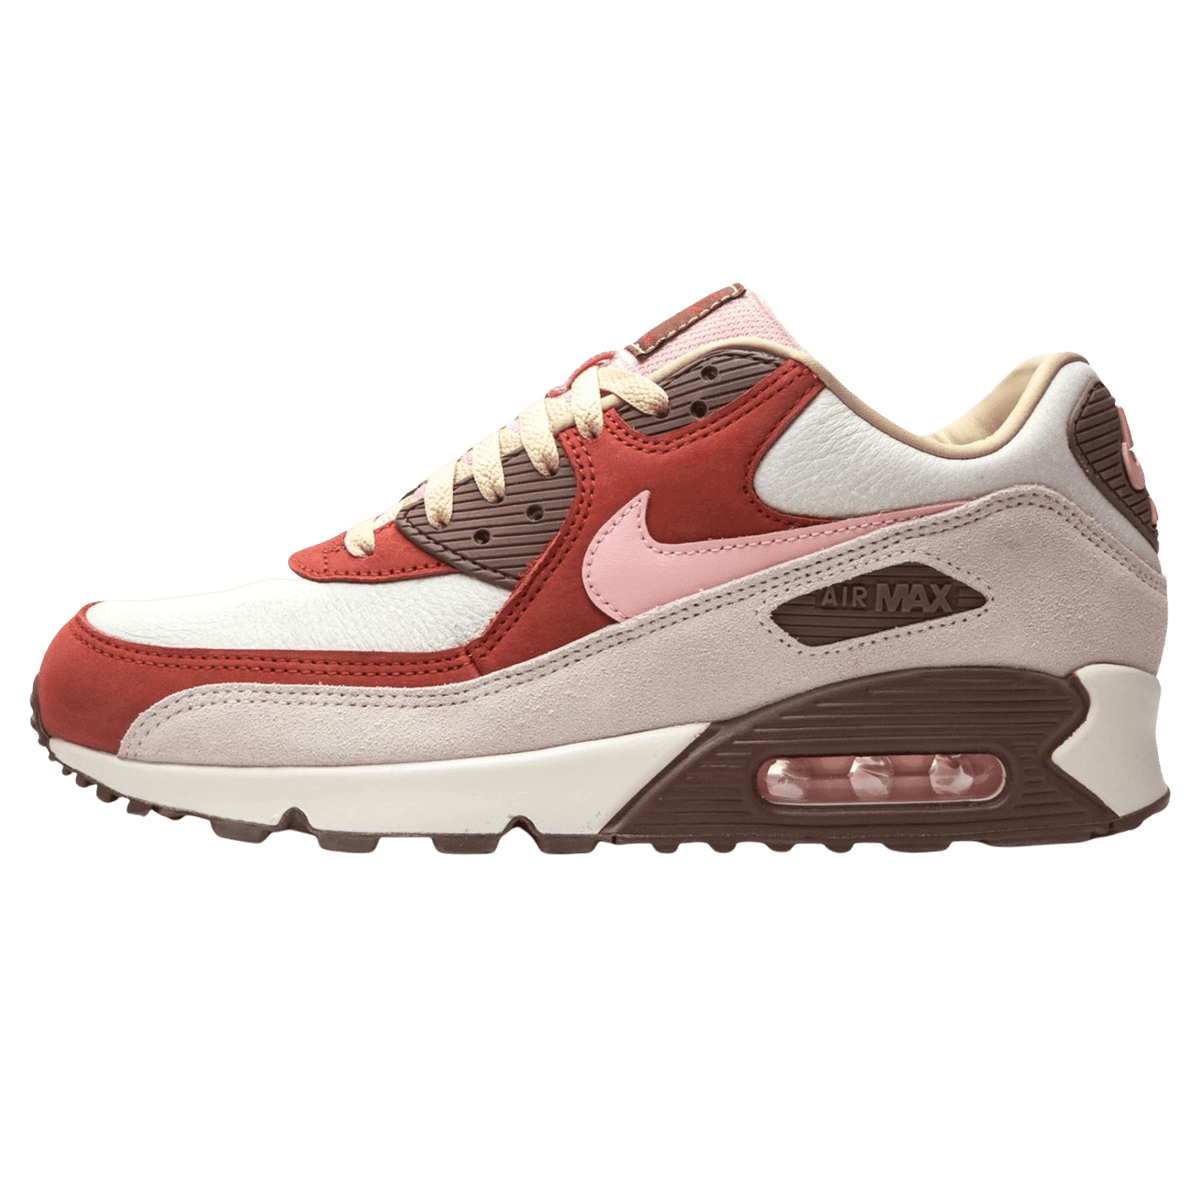 Is The OFF-WHITE x Nike Air Max 90 ICE On Your Must-Cop List